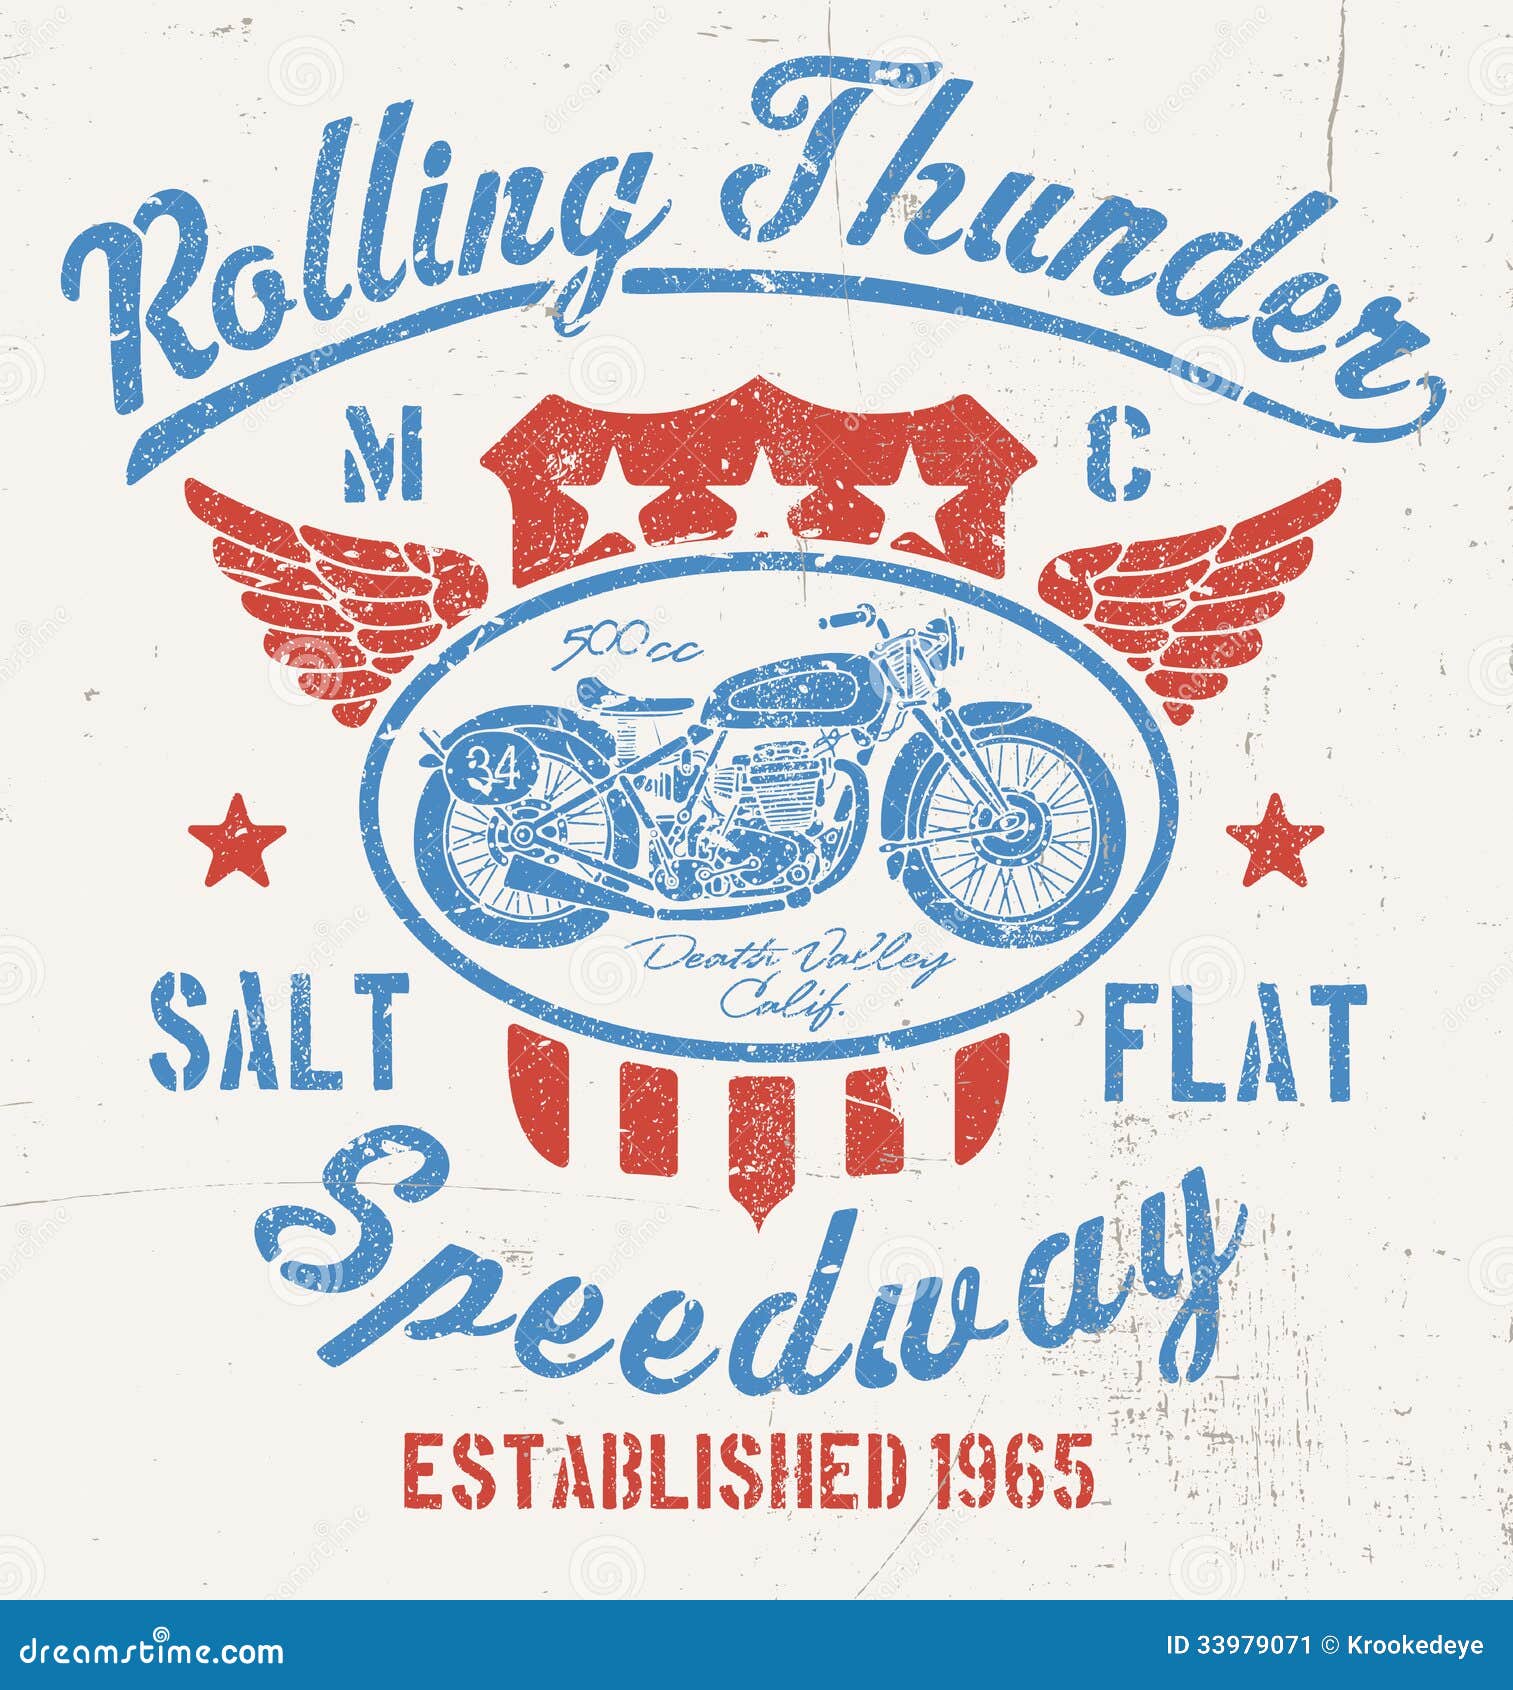 rolling thunder vintage motorcycle graphic